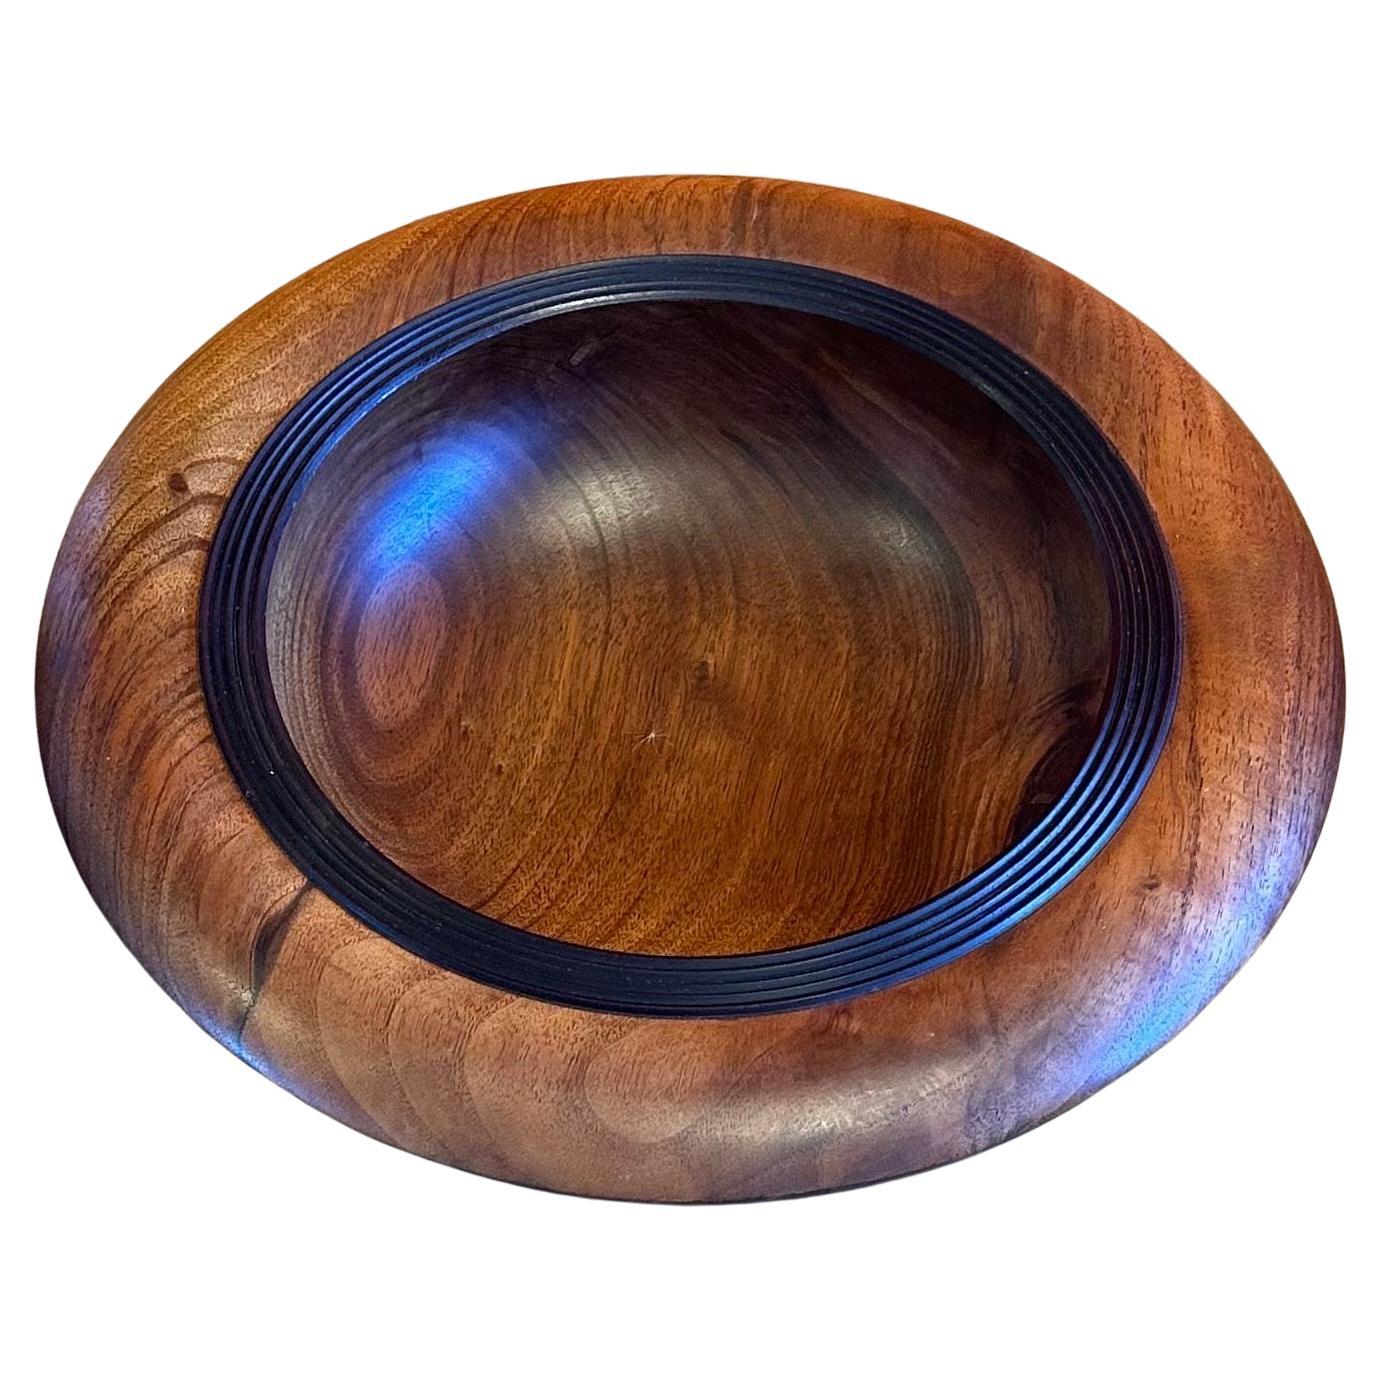 A very nice organic modern solid New Zealand walnut bowl / centerpiece, circa 1980s.  This gorgeous bowl is 12